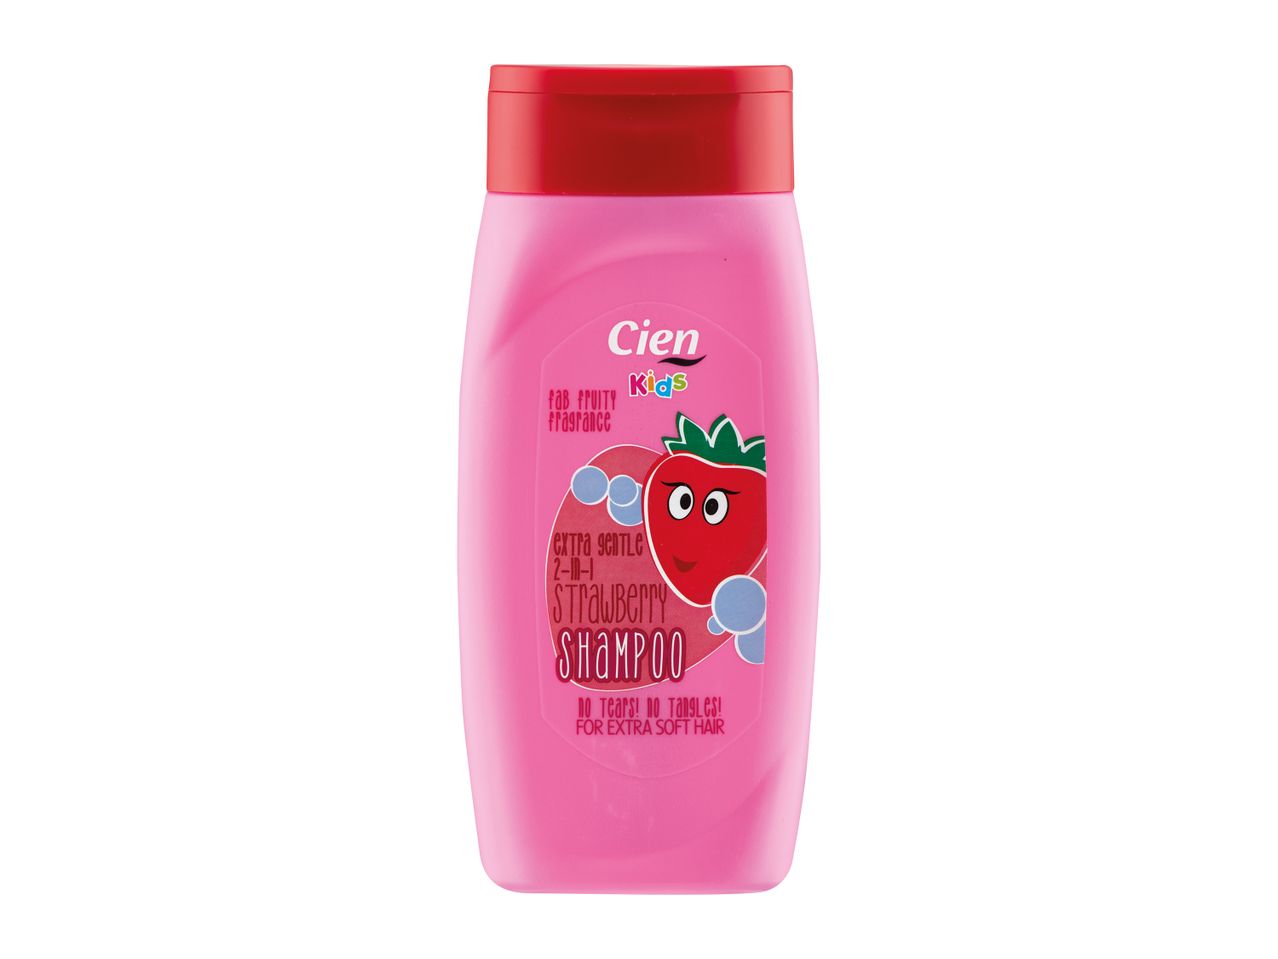 Go to full screen view: Cien Kids 2 in 1 Shampoo - Image 1